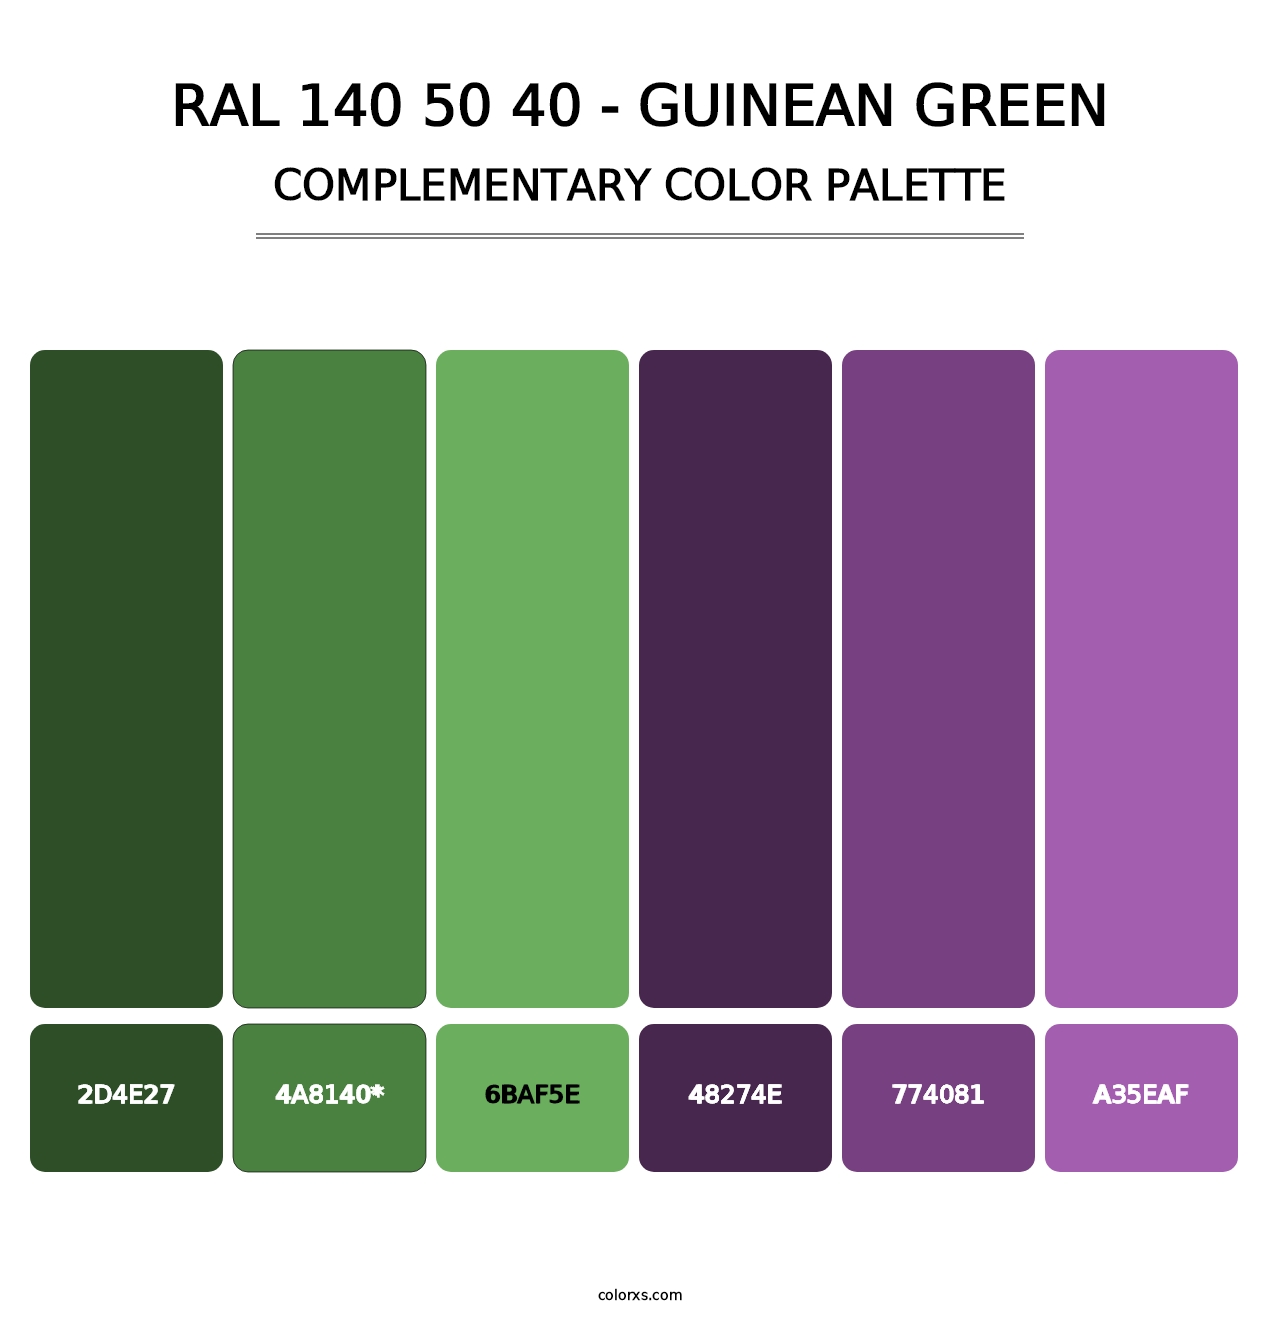 RAL 140 50 40 - Guinean Green - Complementary Color Palette